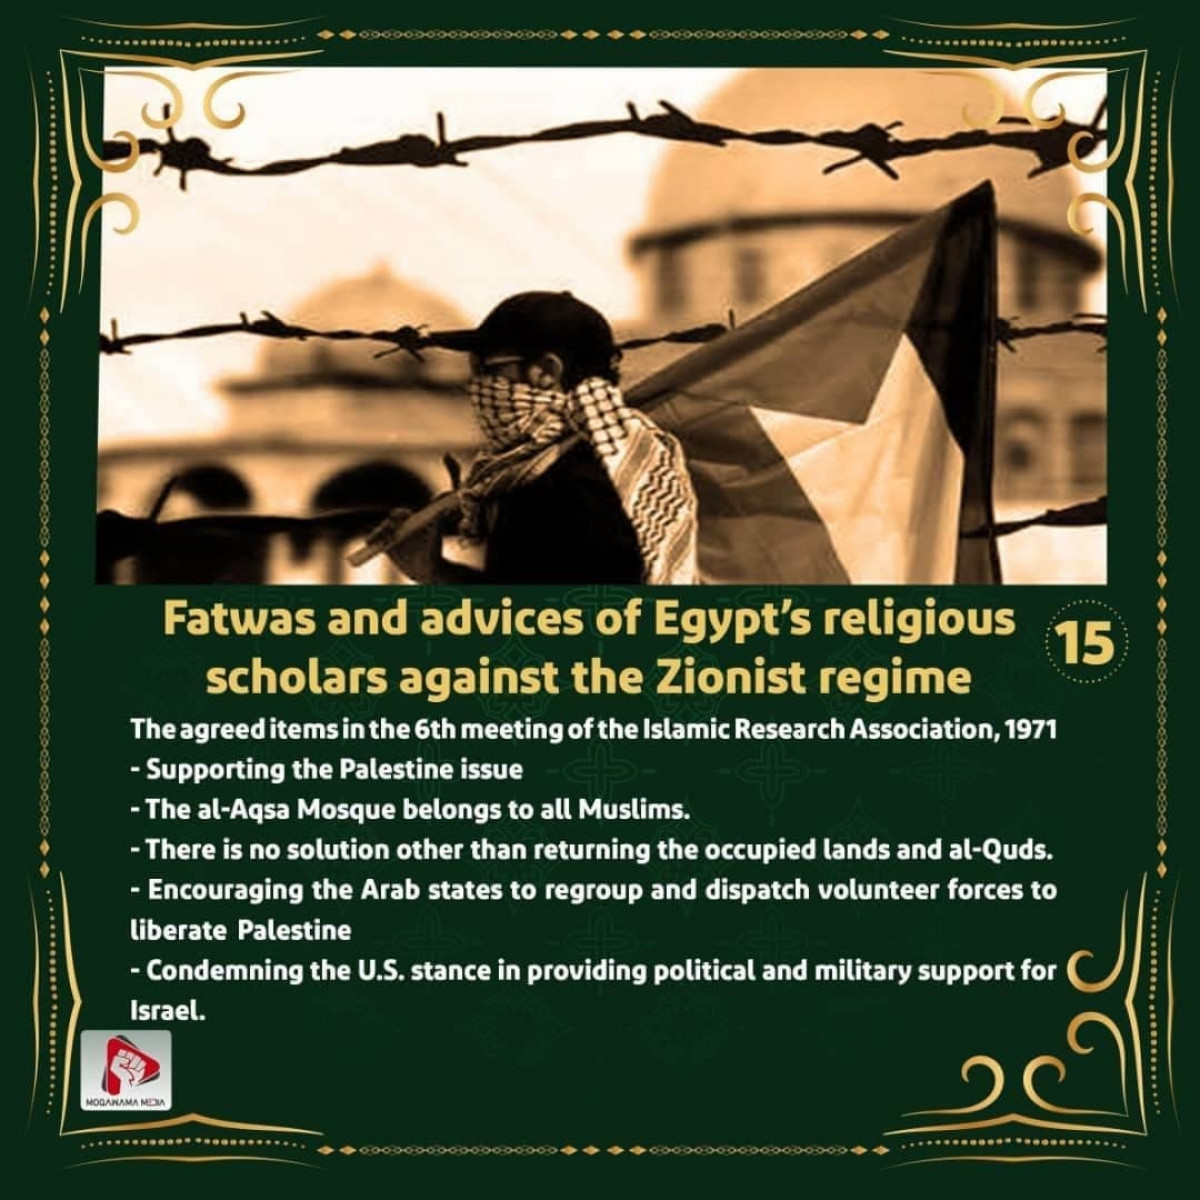 Fatwas and advices of Egypt's religious scholars against the Zionist regime 15